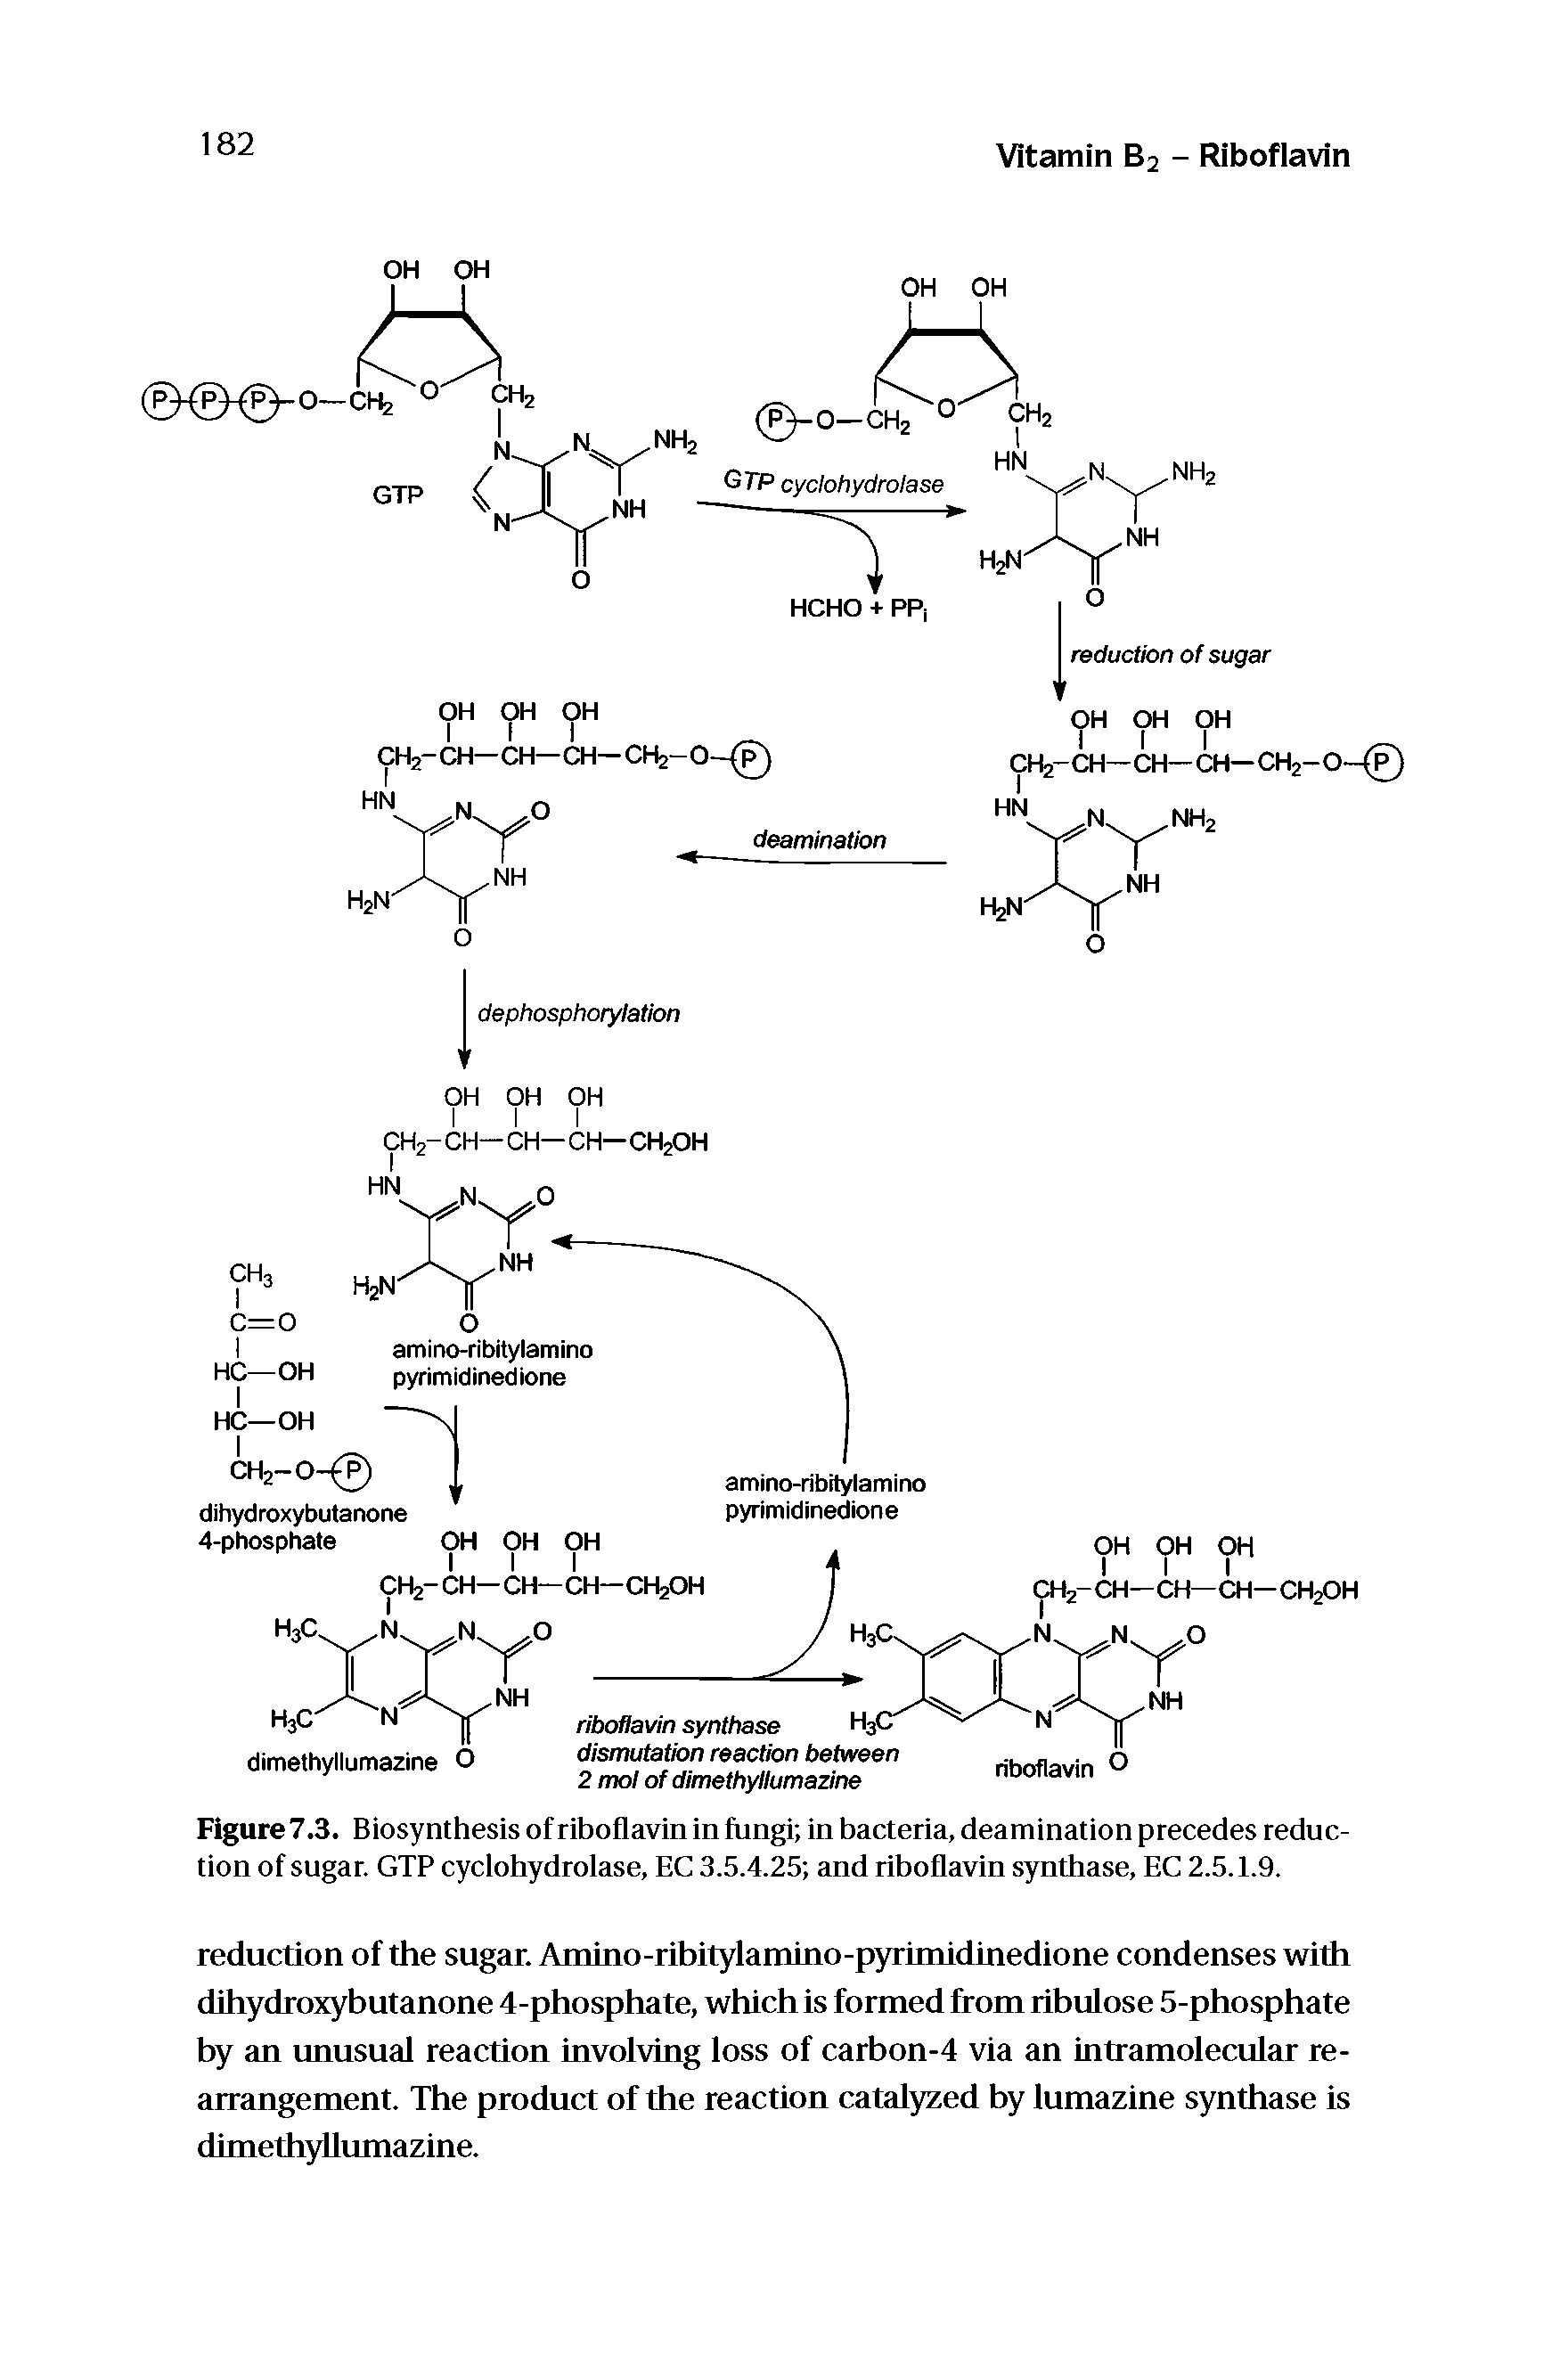 Figure7.3. Biosynthesis of riboflavin in fungi in bacteria, deamination precedes reduction of sugar. GTP cyclohydrolase, EC 3.5.4.25 and riboflavin synthase, EC 2.5. f.9.